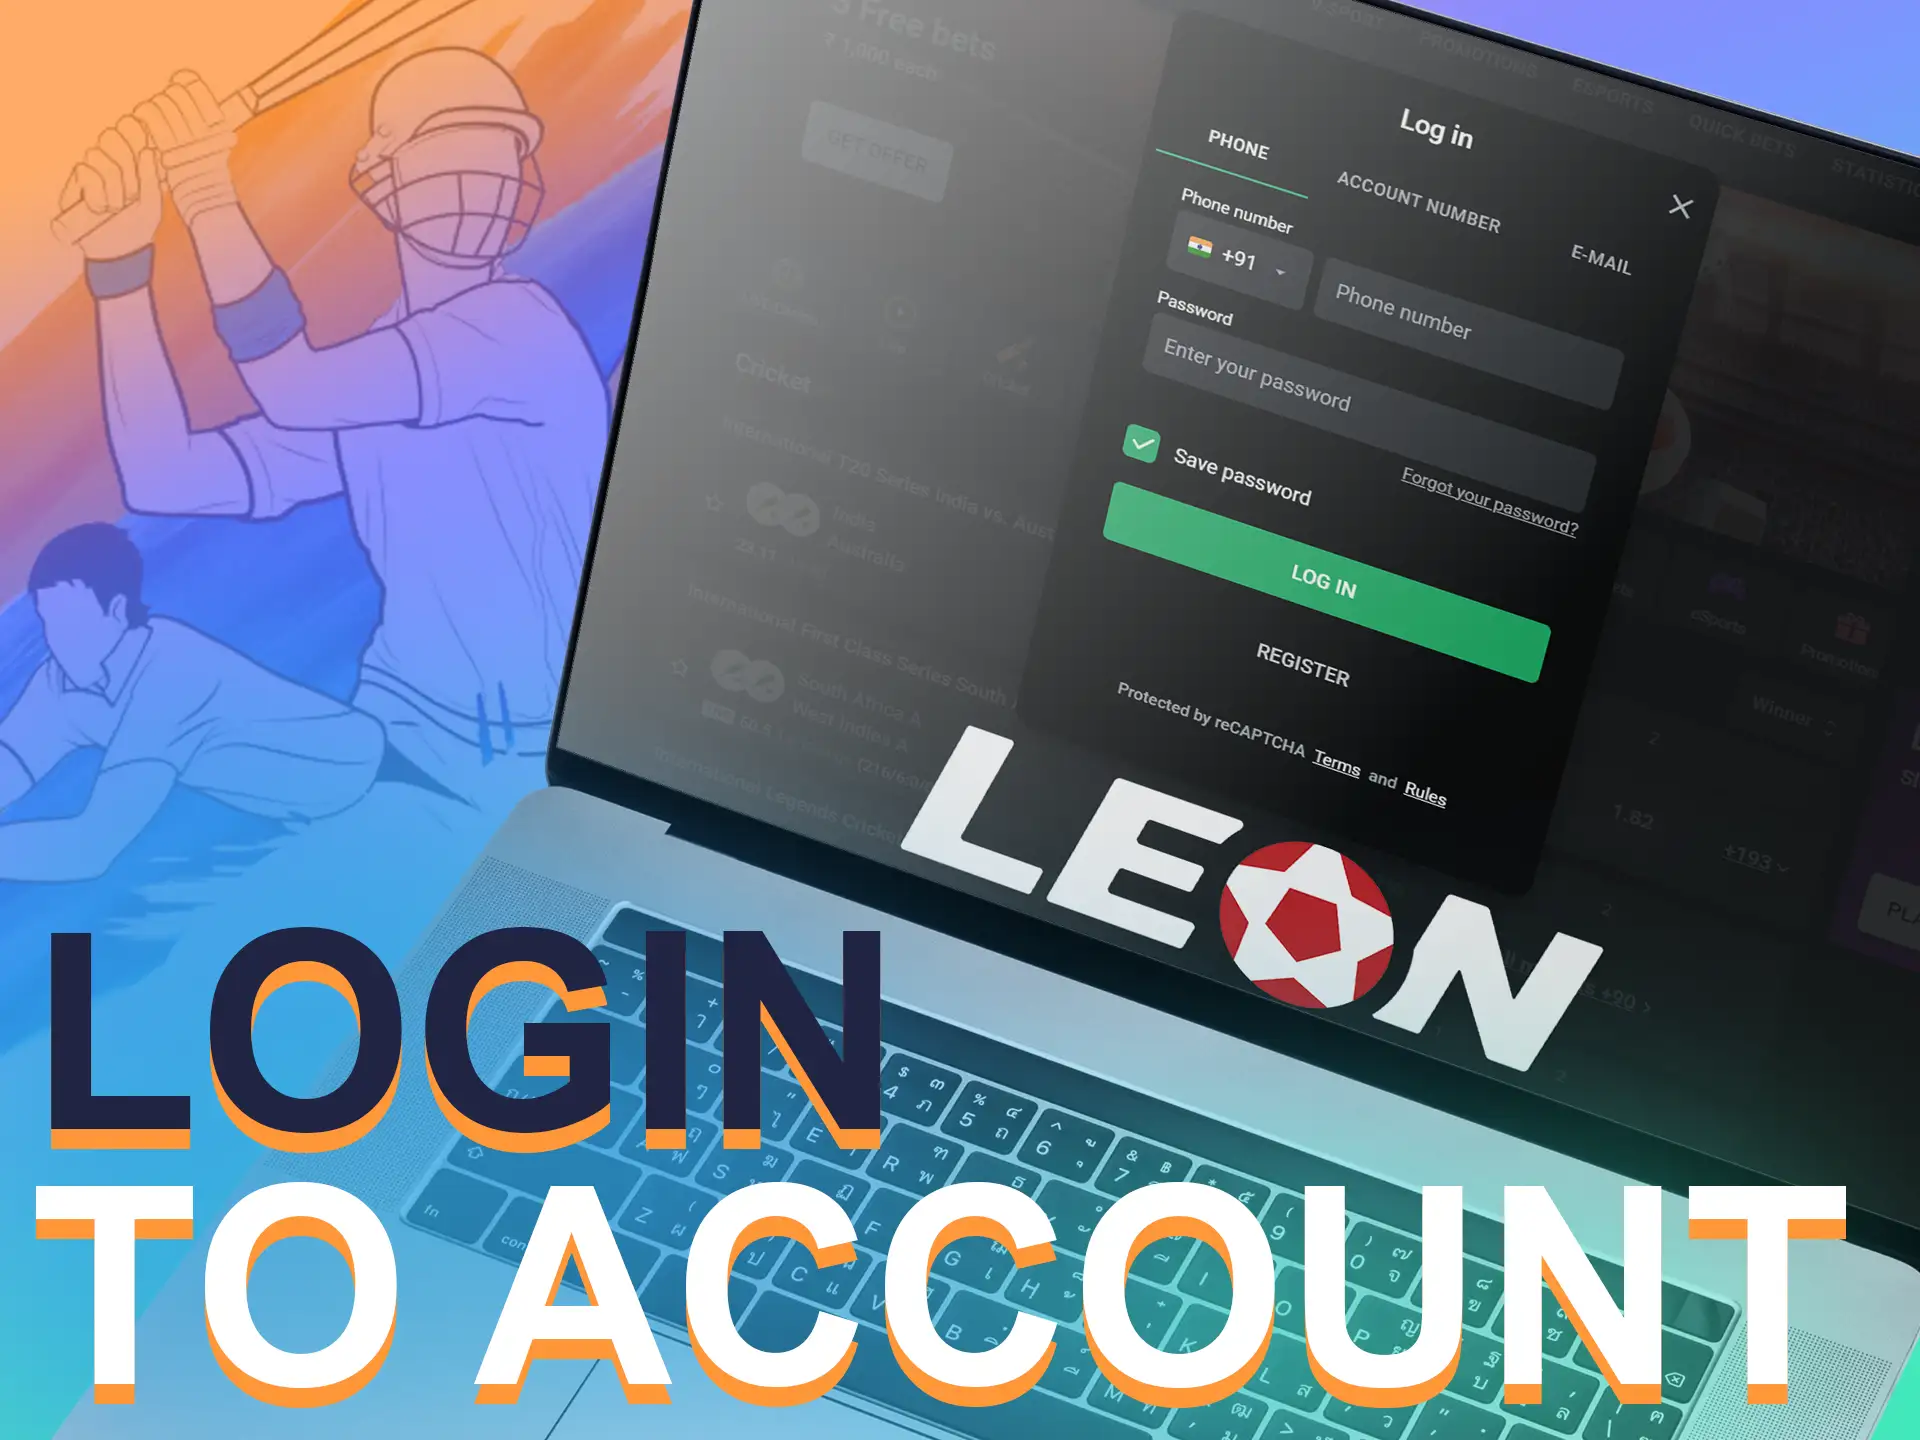 Log in to your account on the LeonBet homepage and start playing.